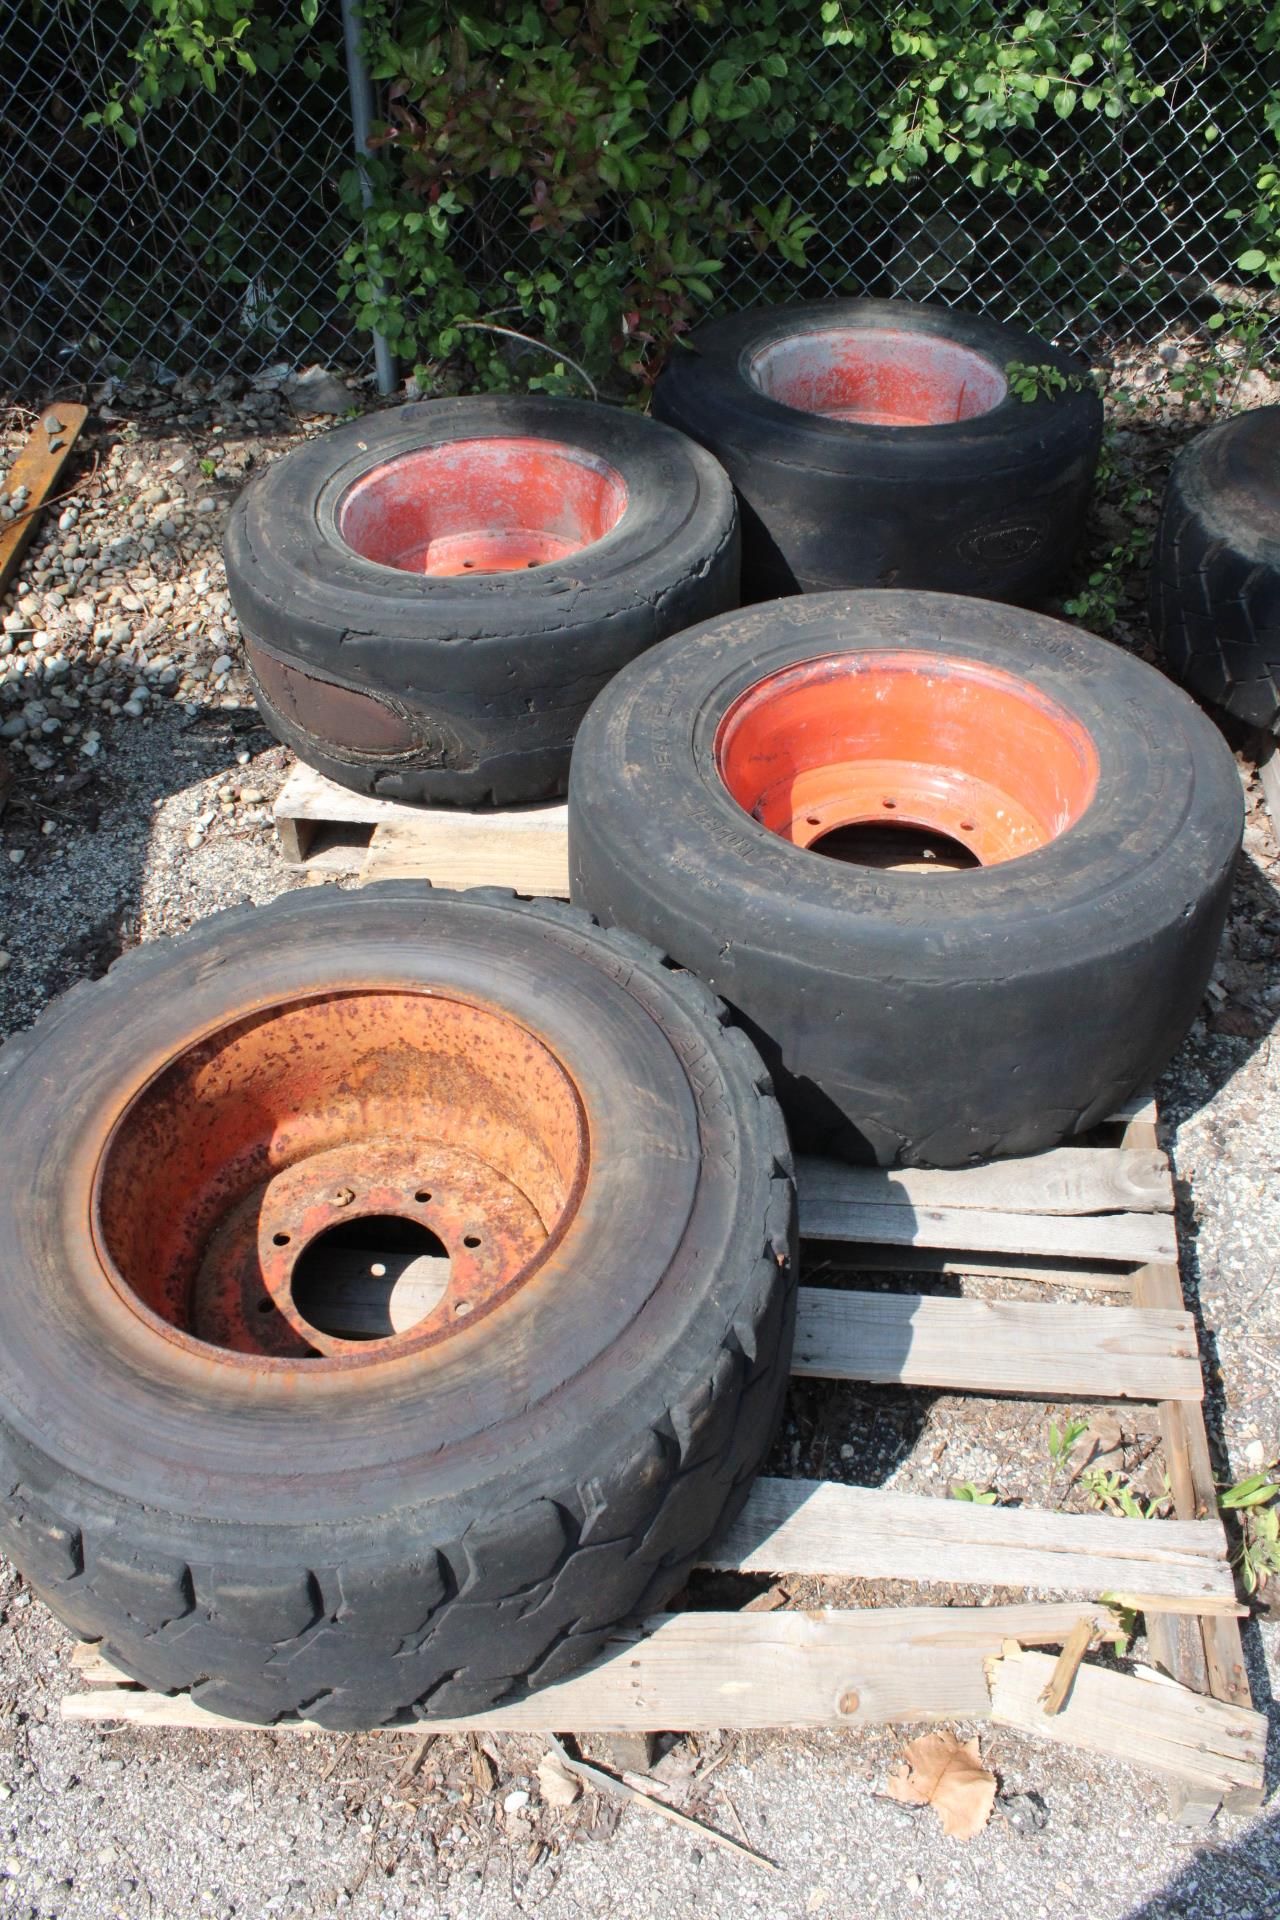 (4) SKID STEER TIRES WITH RIMS